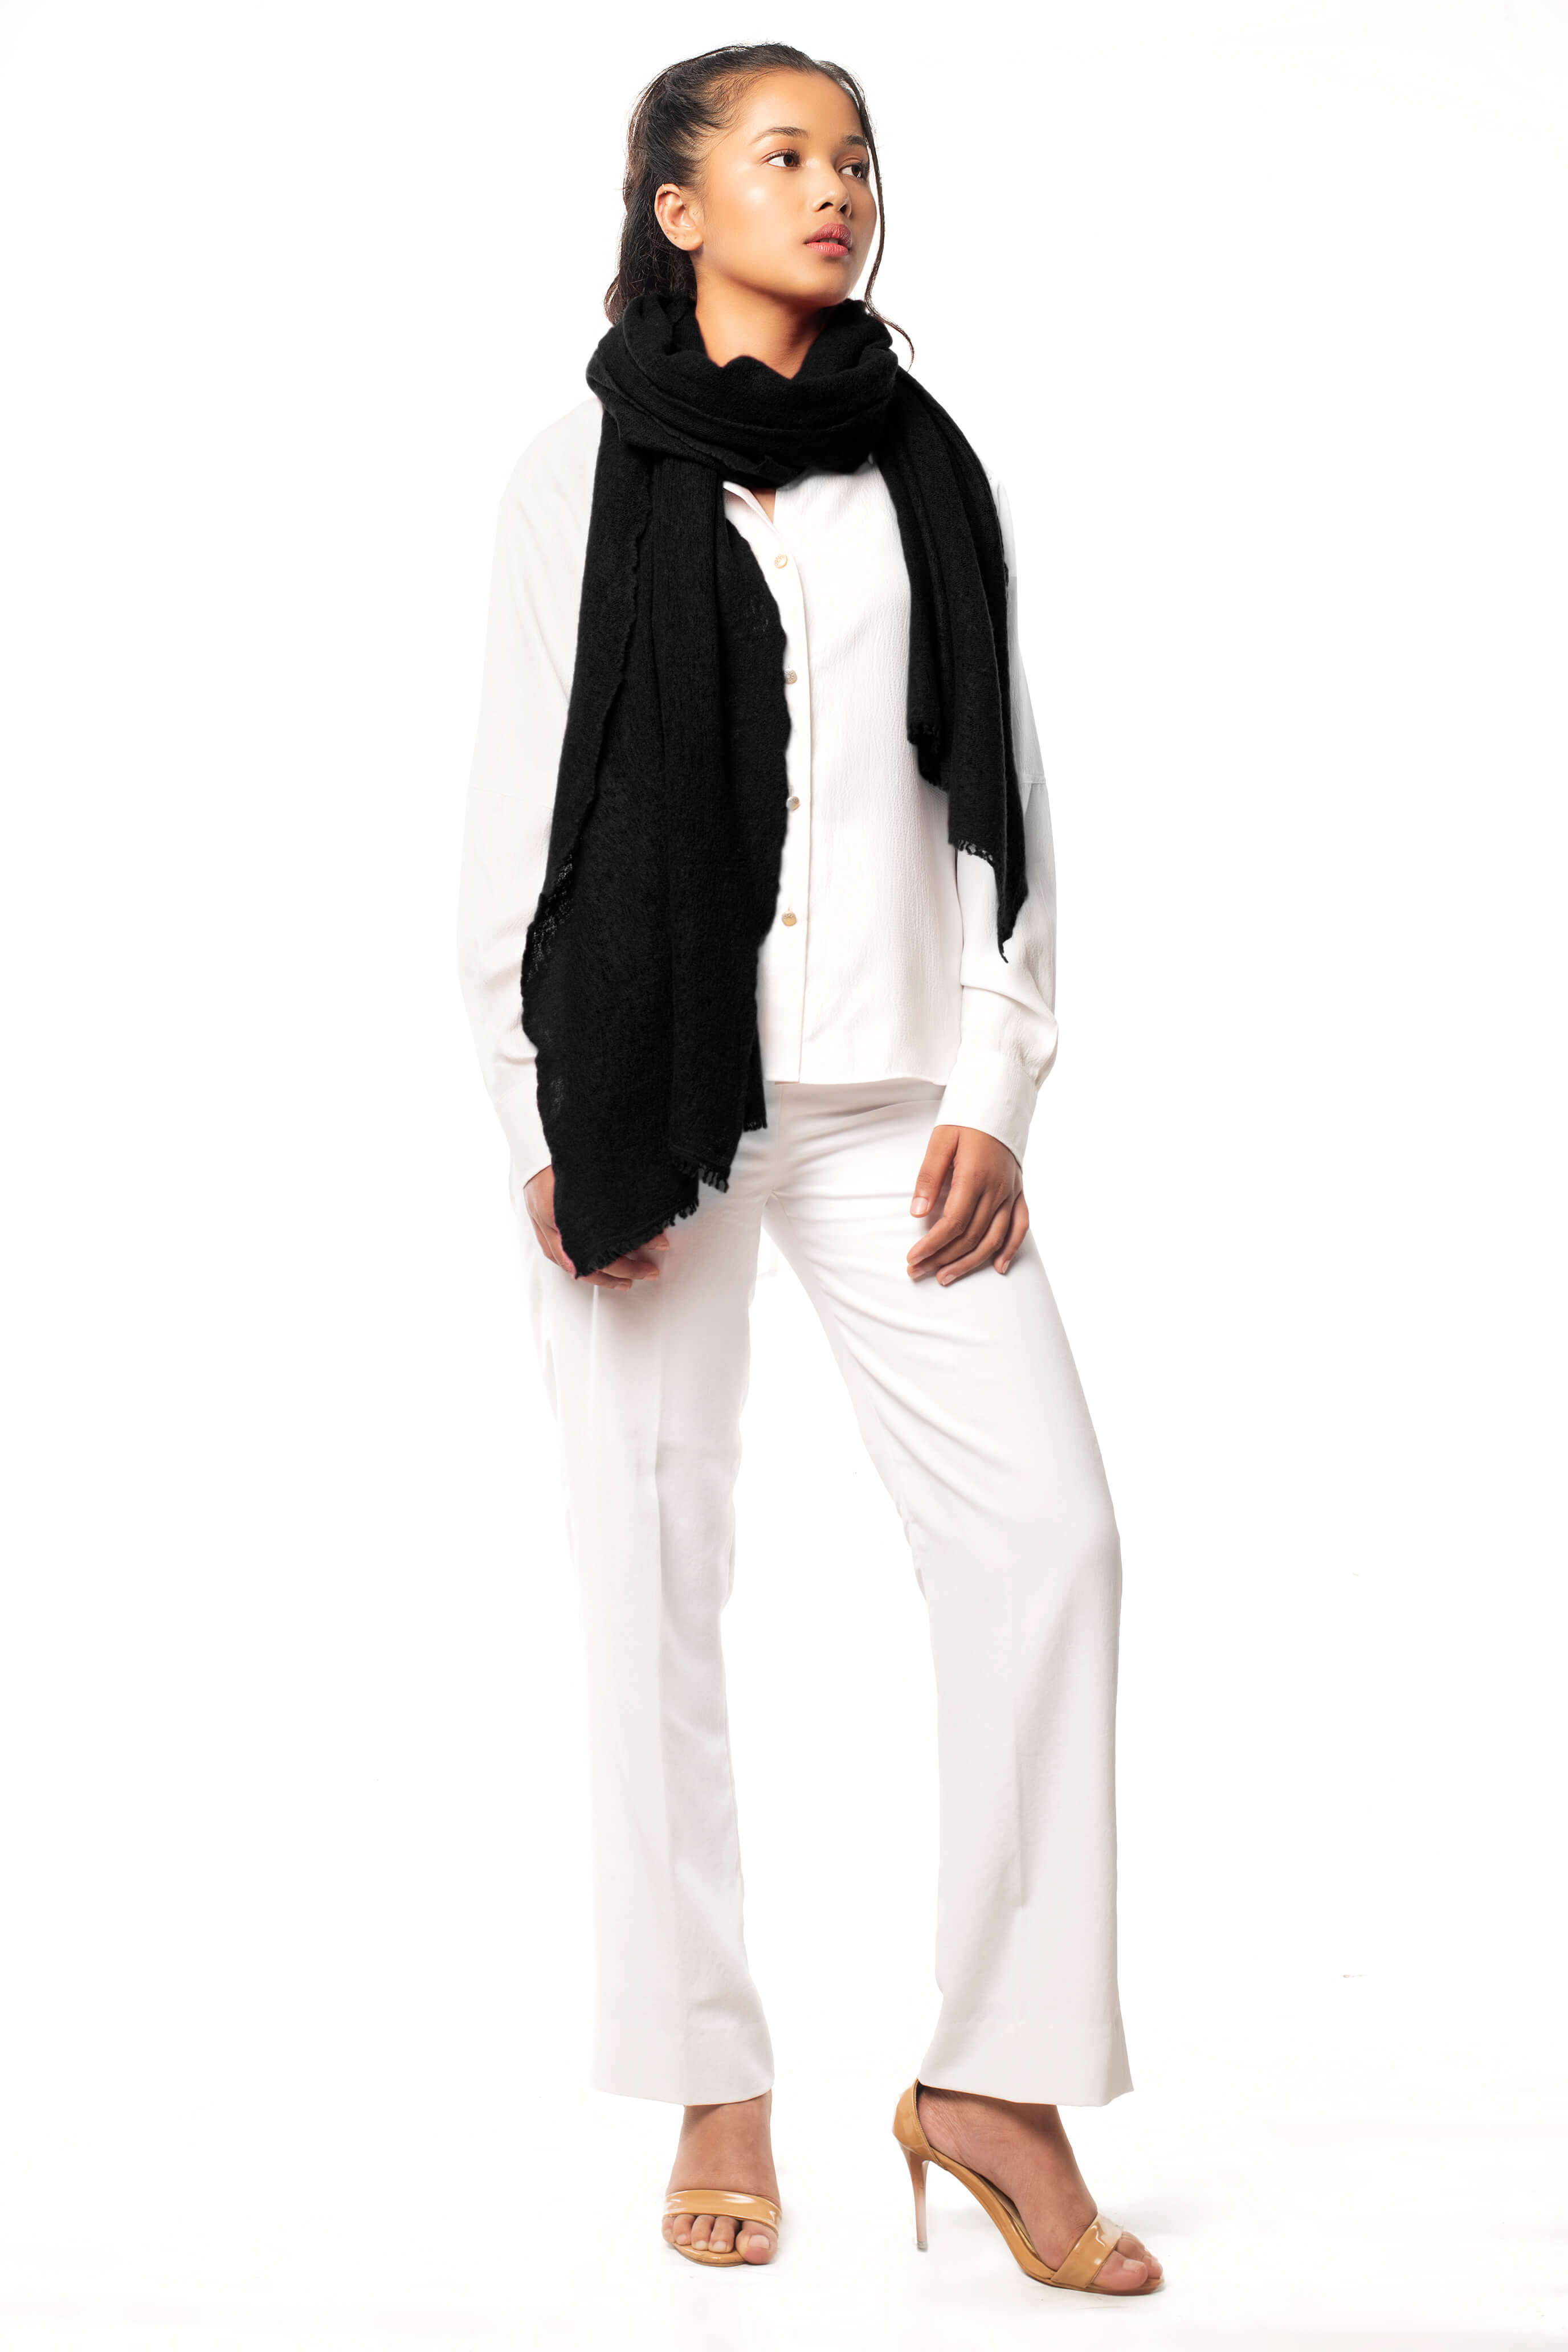 Premium Black and White Cashmere Scarves Collection